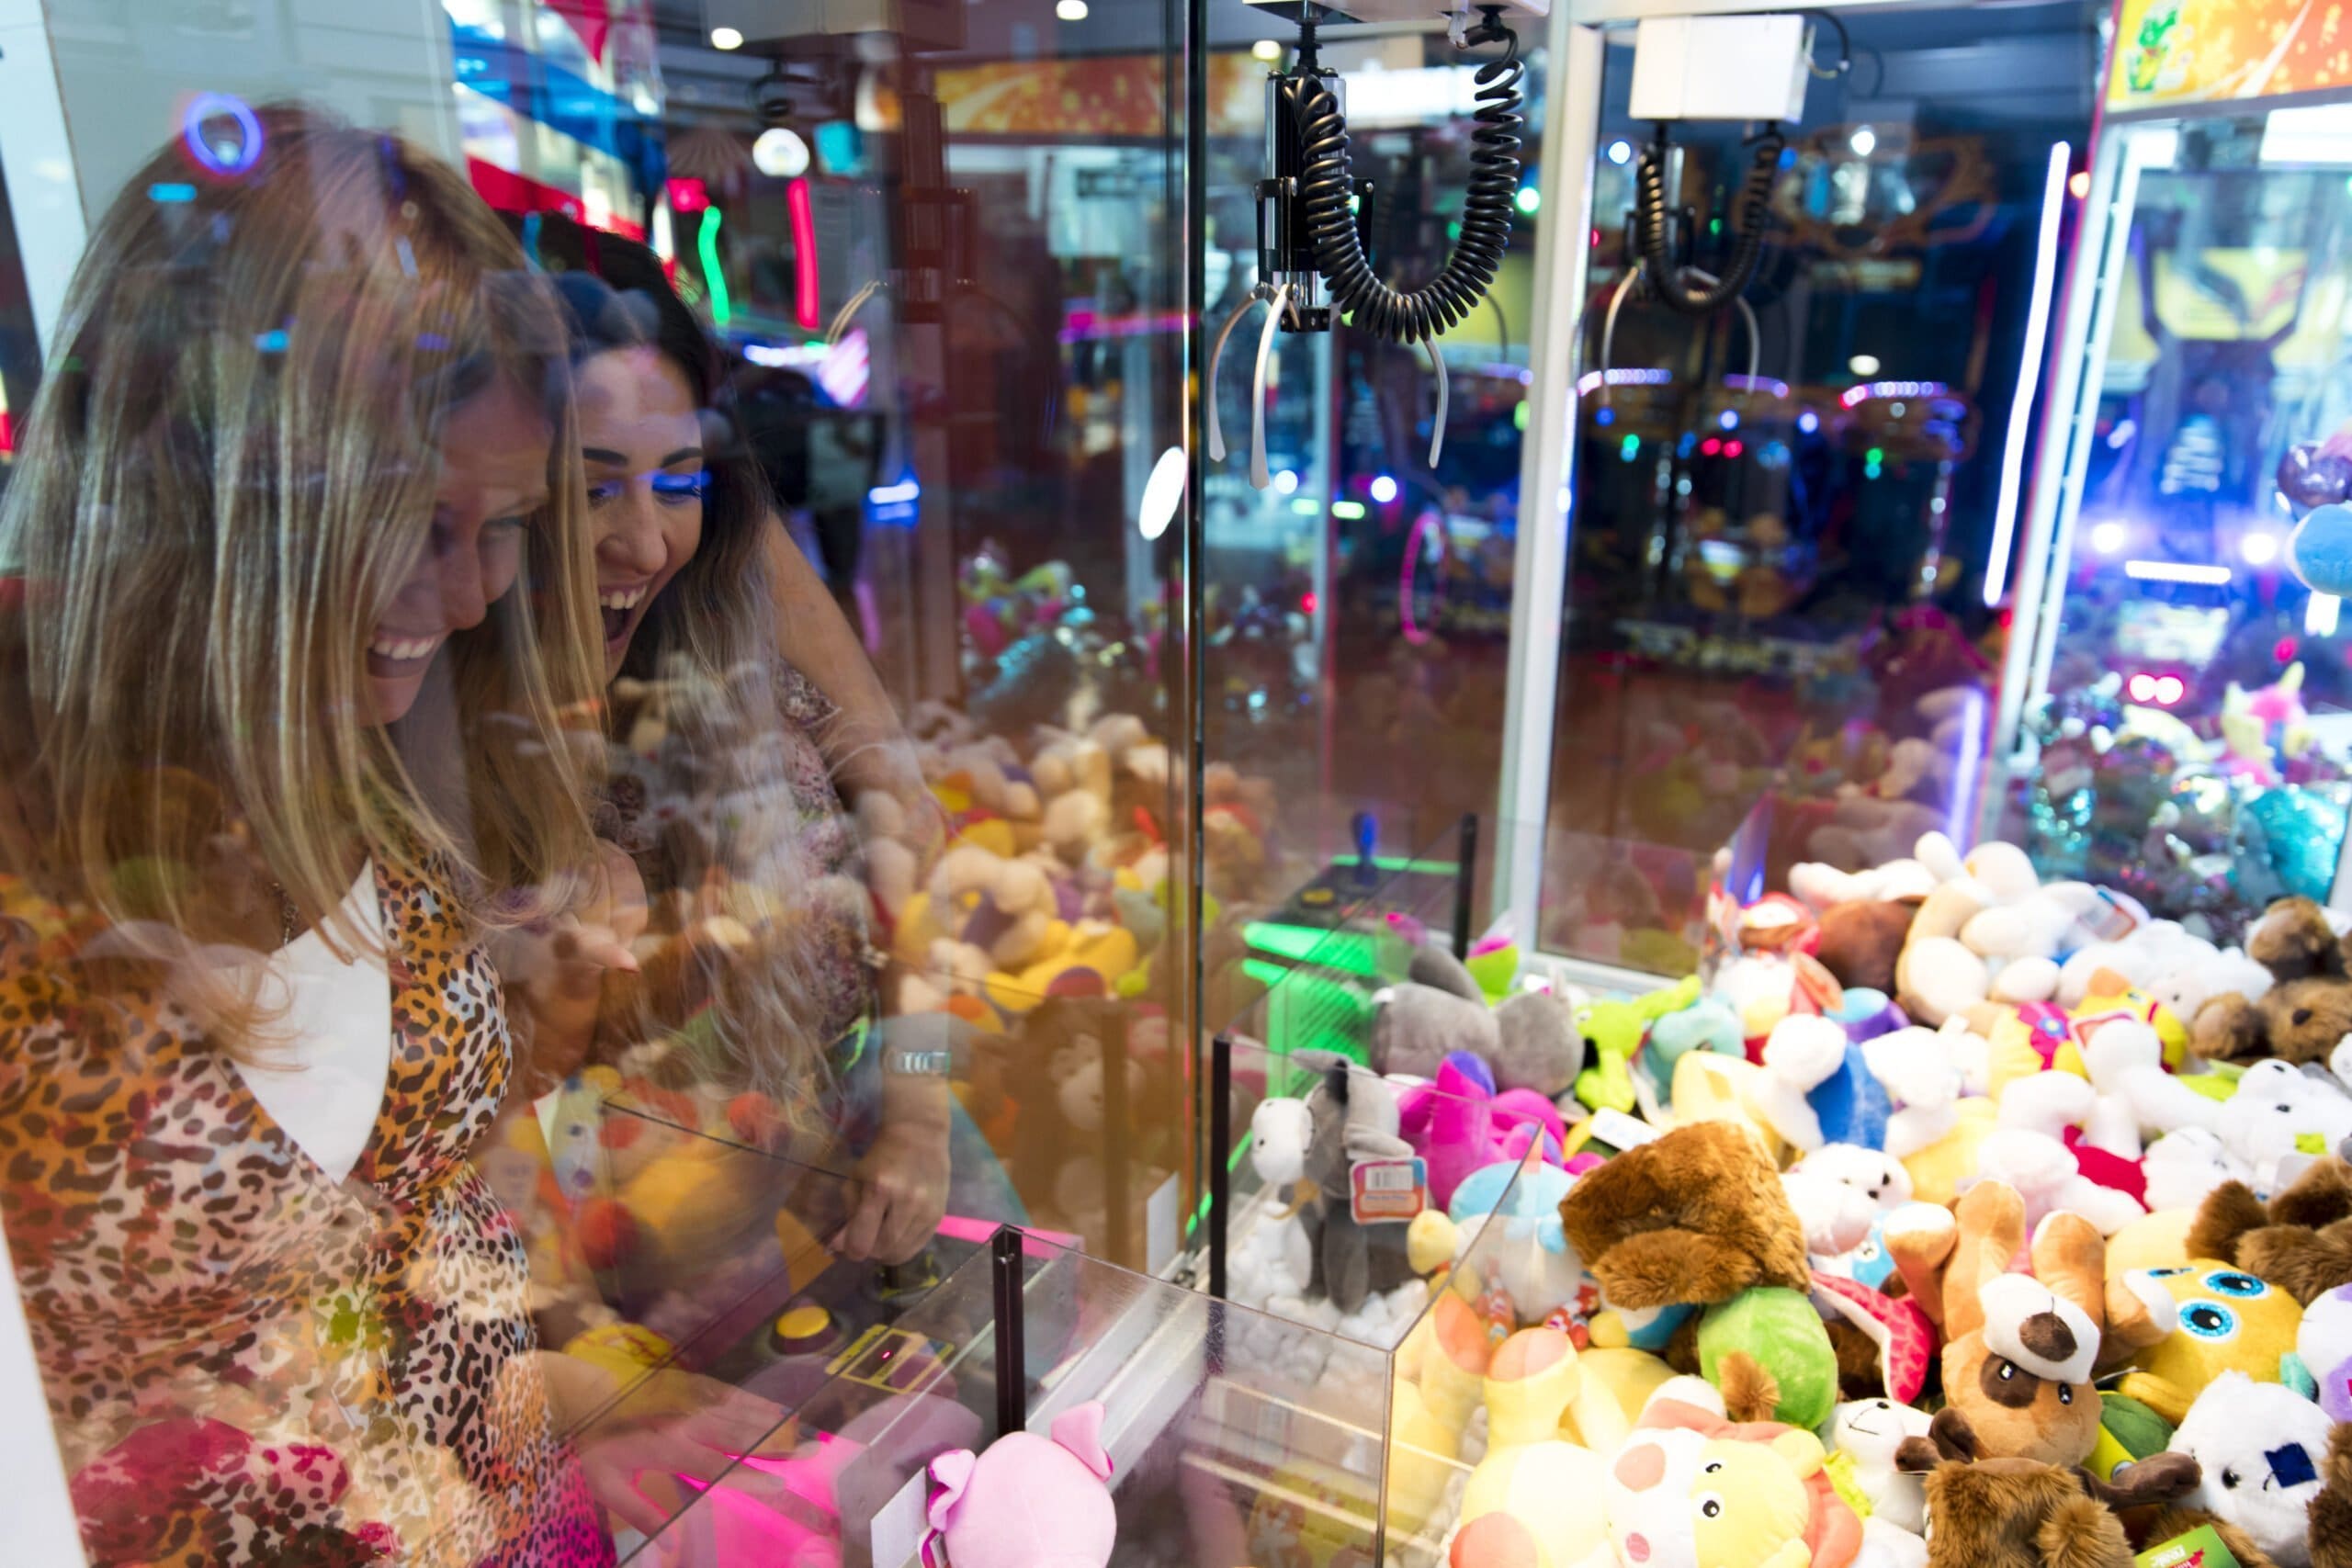 Two women playing an arcade claw game